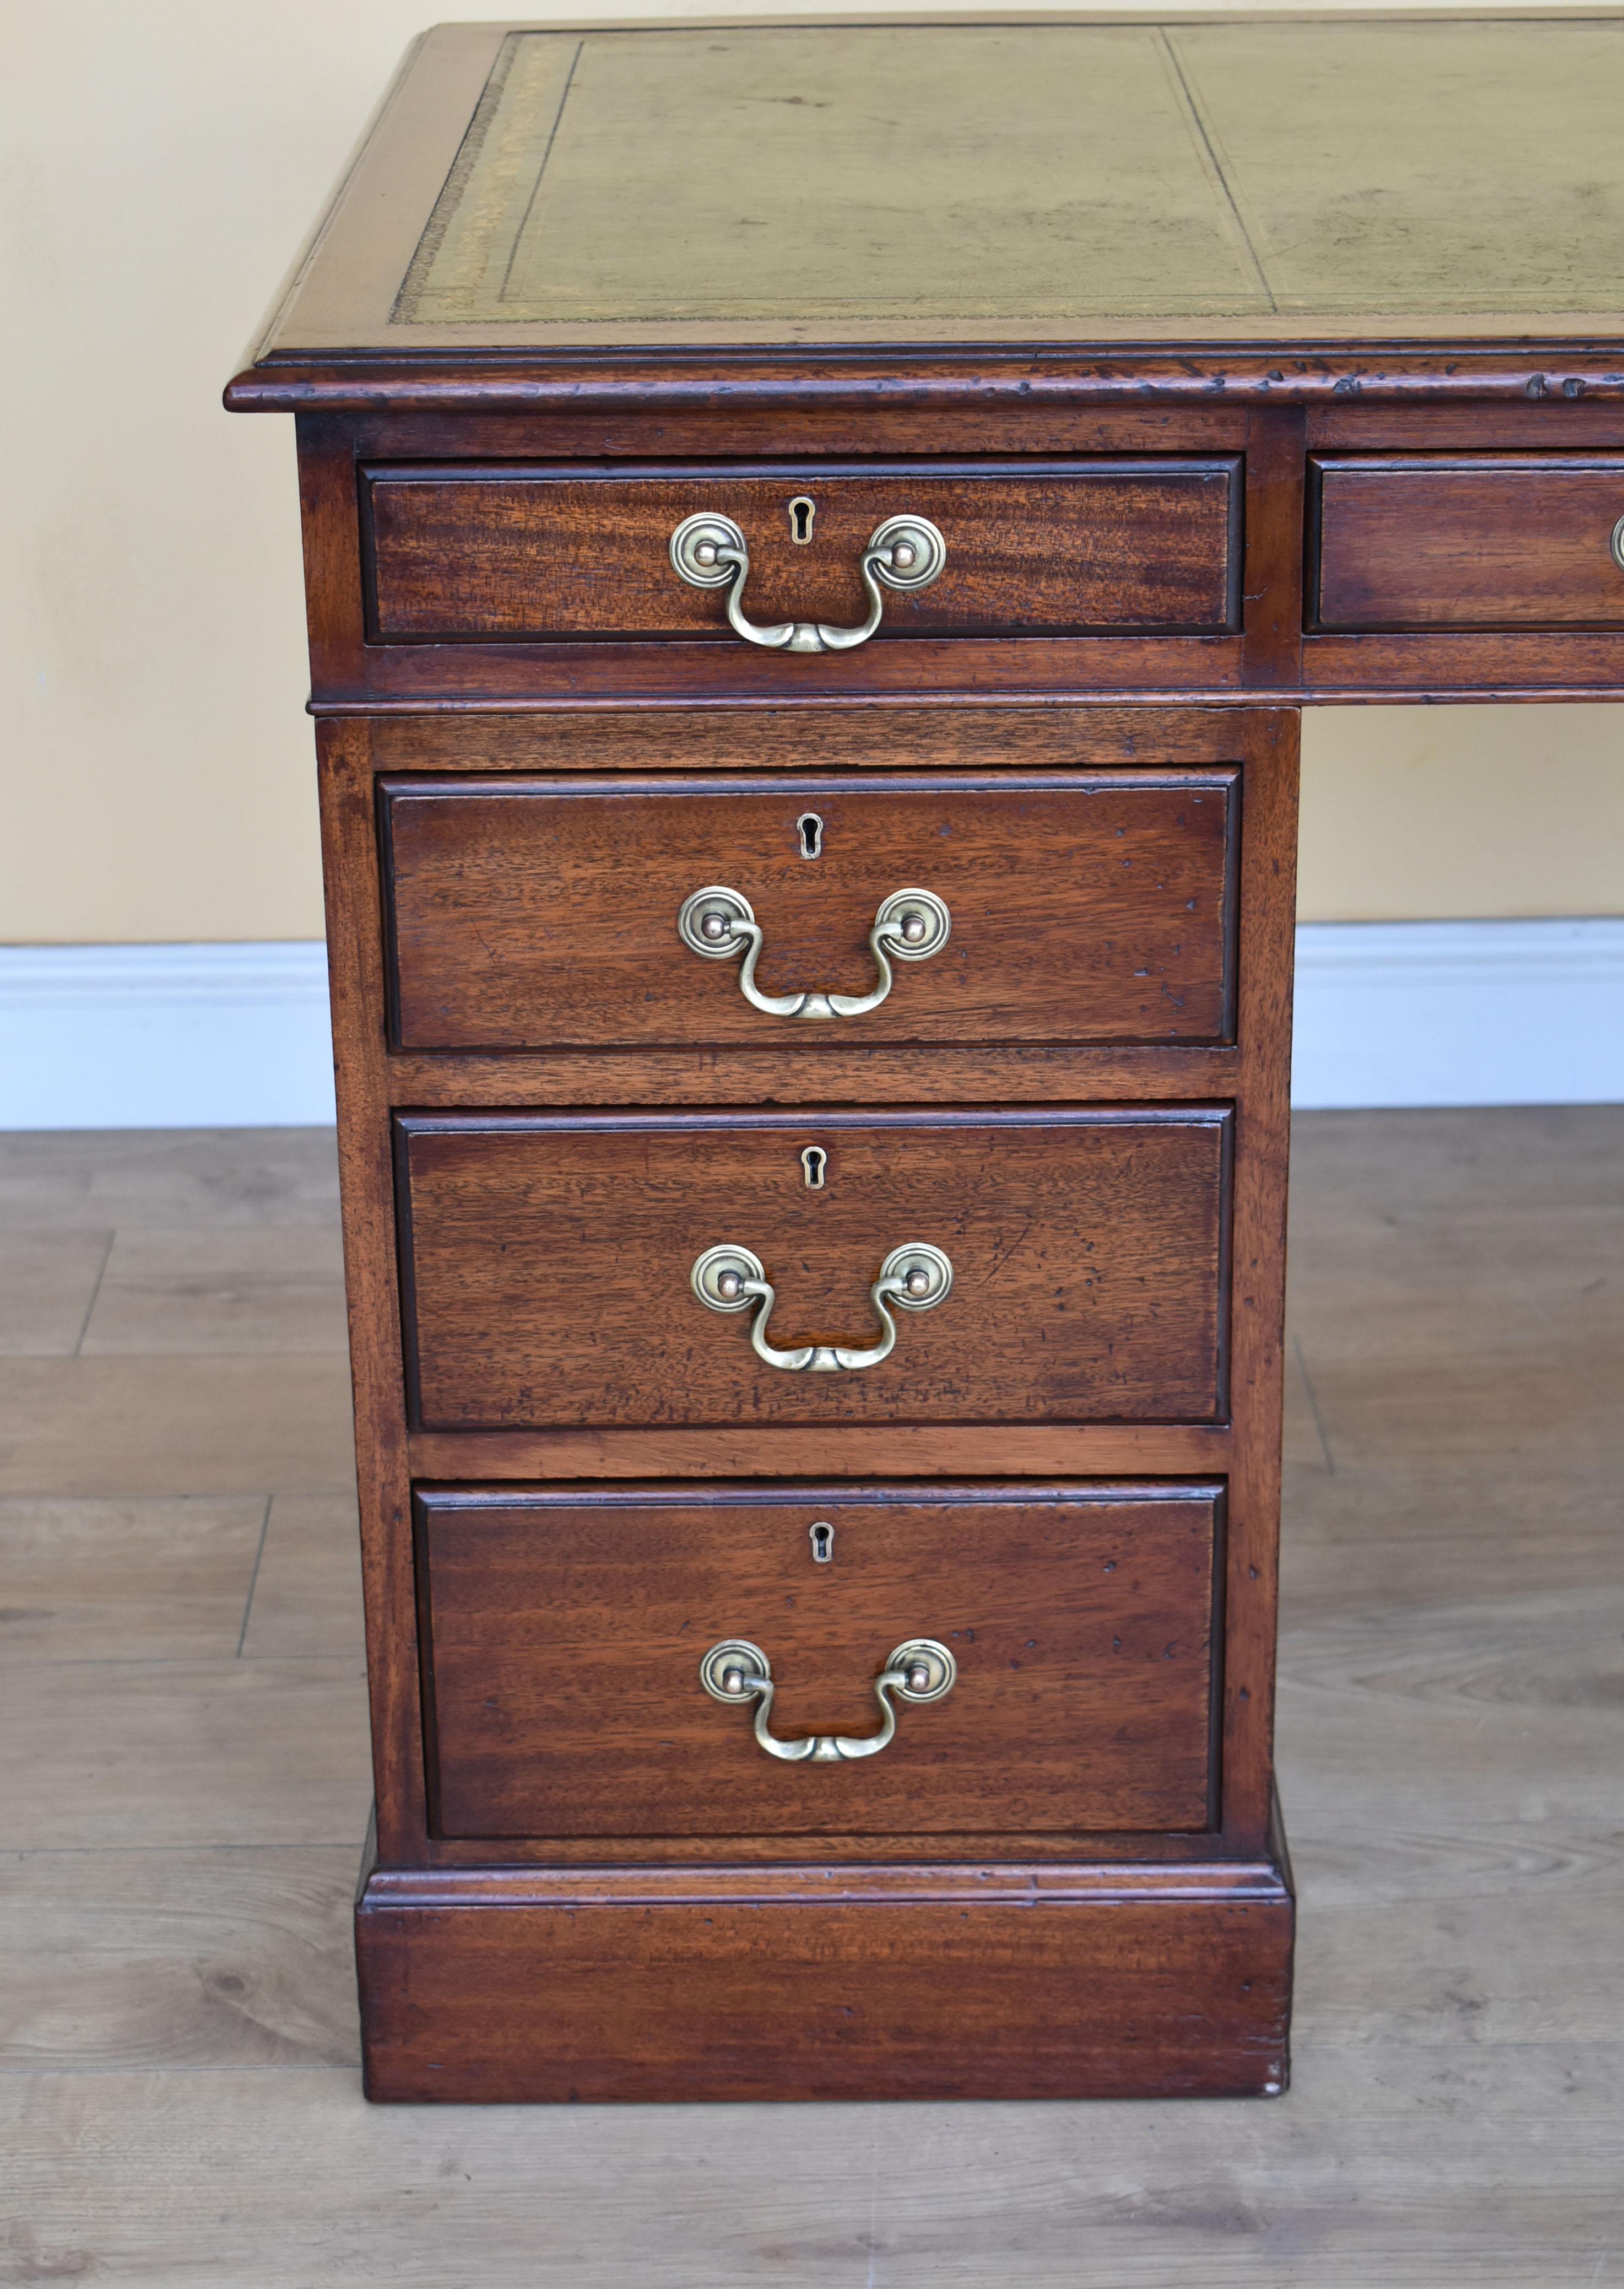 For sale is an early 20th century Edwardian mahogany pedestal desk. The top has an inset green leather with decorative gold tooling above three drawers in the top, one long in the centre, flanked by a short drawer on each side. The top fits onto two